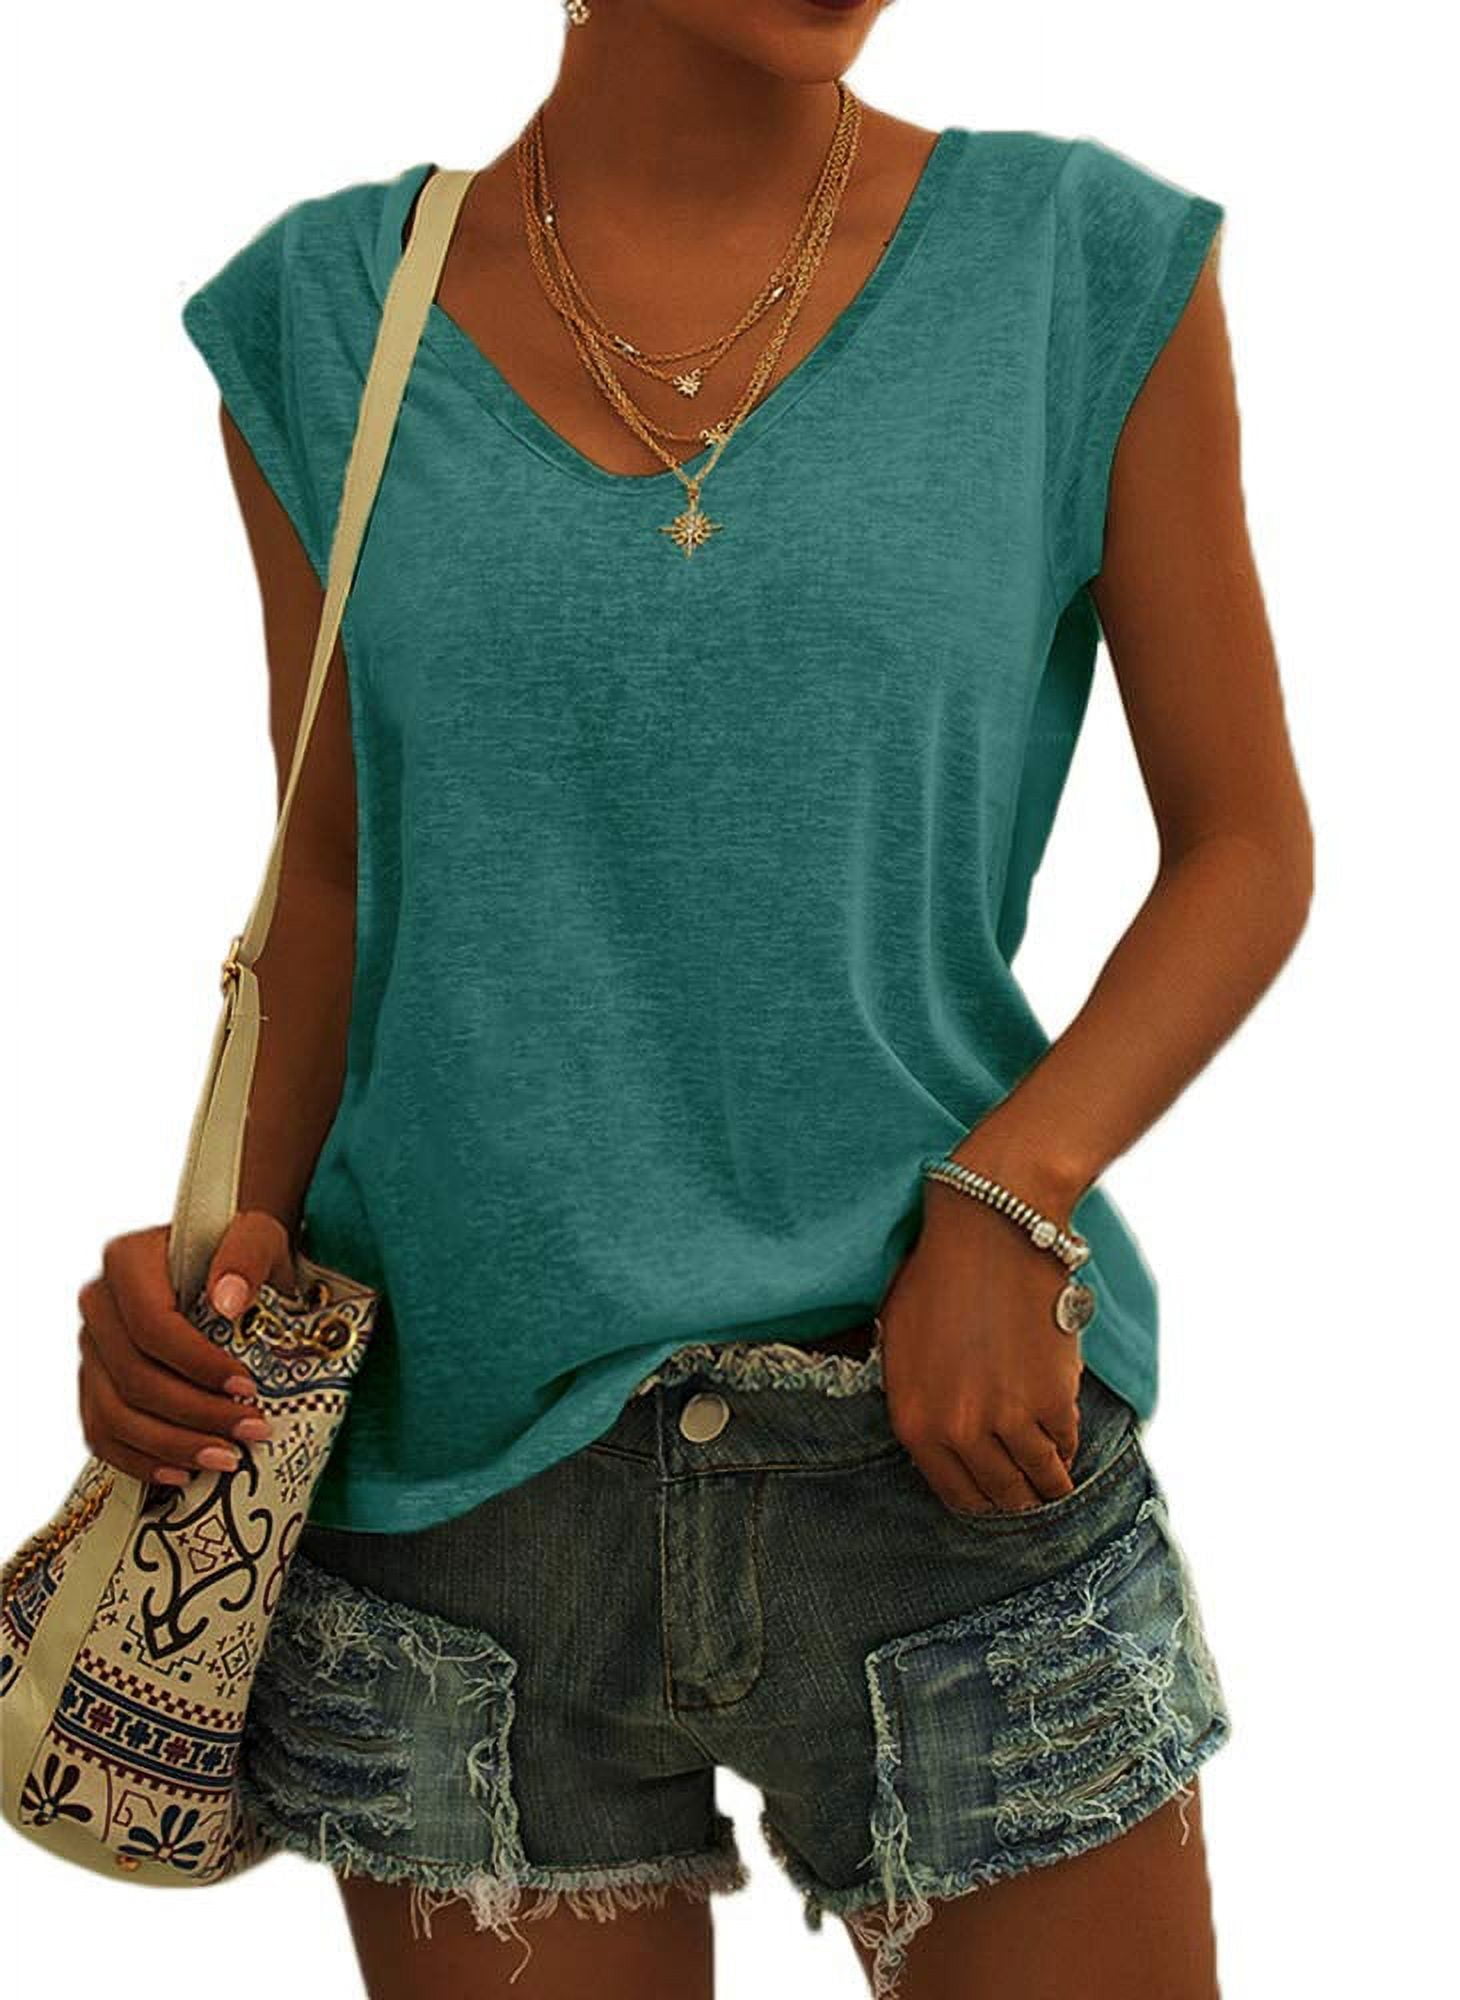 Sherrylily Women Cap Sleeve T-Shirt Casual Loose Fit Tank Tops S-2XL(US ...